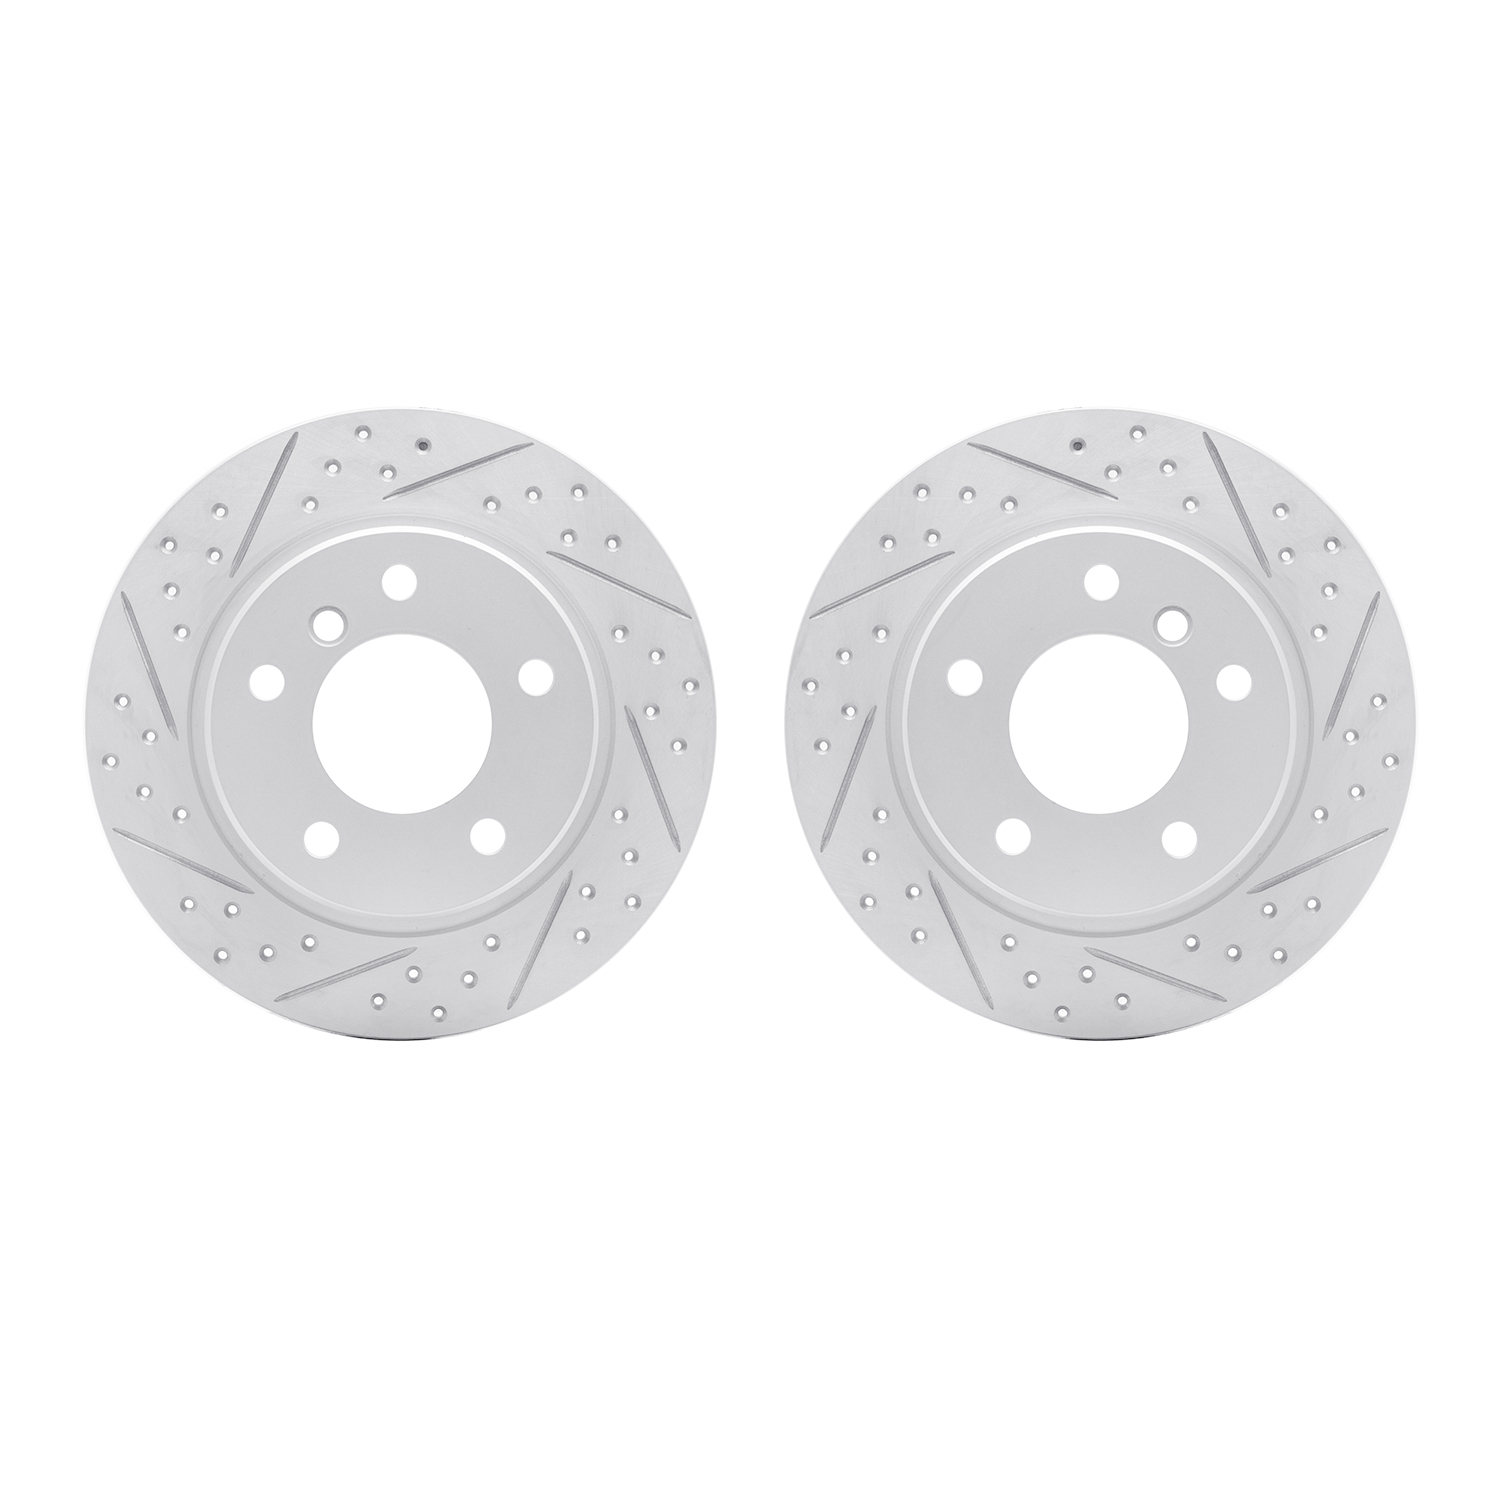 2002-31058 Geoperformance Drilled/Slotted Brake Rotors, 1991-1999 BMW, Position: Rear